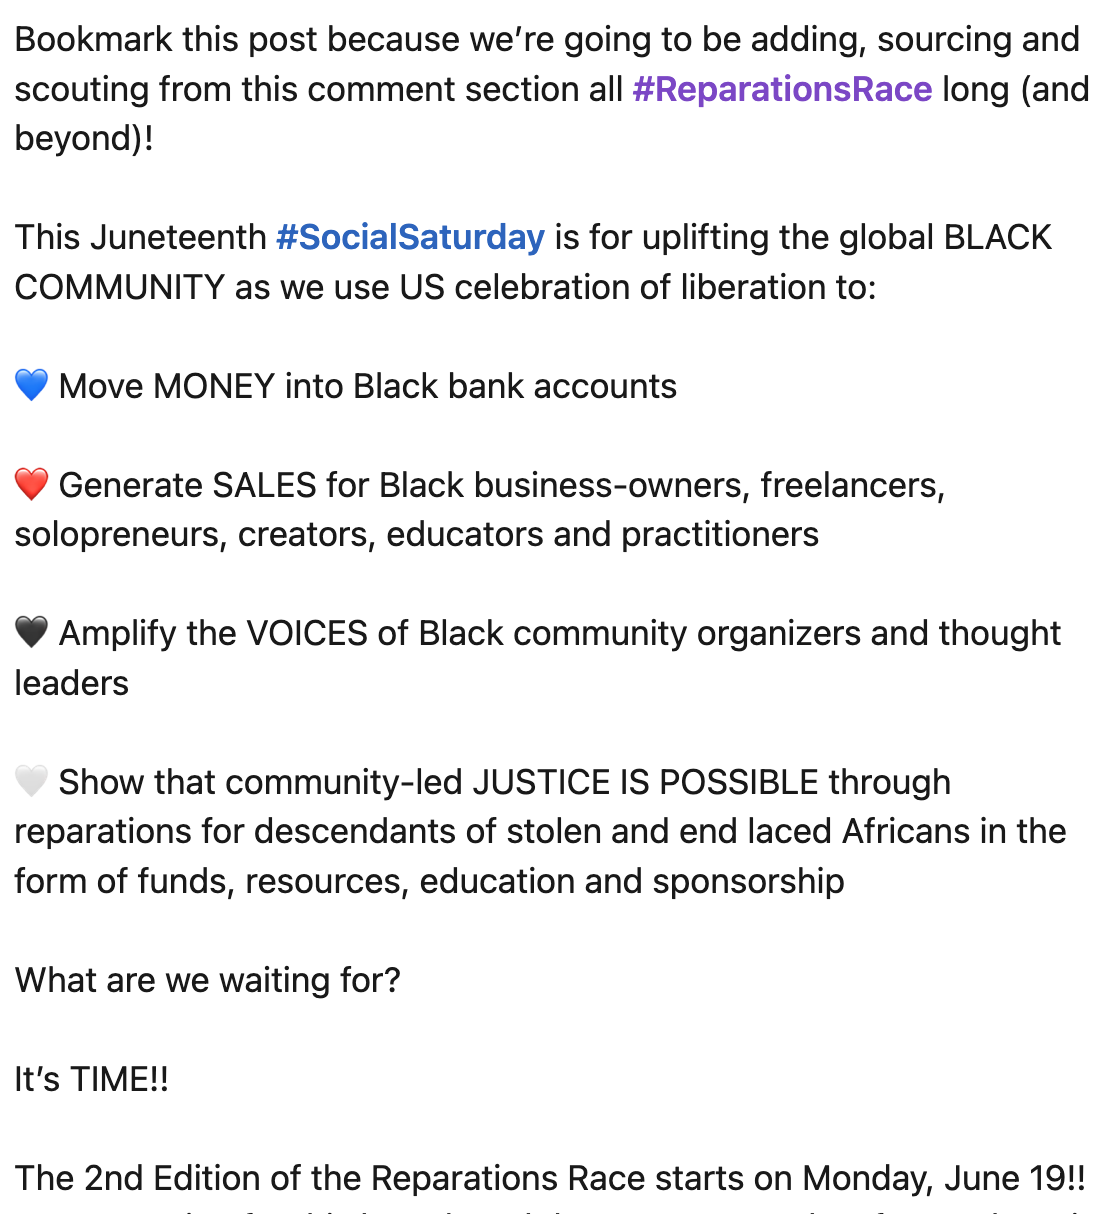 LinkedIn post screenshot "Bookmark this post because we’re going to be adding, sourcing and scouting from this comment section all #ReparationsRace long (and beyond)!  This Juneteenth #SocialSaturday is for uplifting the global BLACK COMMUNITY as we use US celebration of liberation to:  💙 Move MONEY into Black bank accounts  ❤️ Generate SALES for Black business-owners, freelancers, solopreneurs, creators, educators and practitioners  🖤 Amplify the VOICES of Black community organizers and thought leaders  🤍 Show that community-led JUSTICE IS POSSIBLE through reparations for descendants of stolen and end laced Africans in the form of funds, resources, education and sponsorship  What are we waiting for?  It’s TIME!!  The 2nd Edition of the Reparations Race starts on Monday, June 19!!"